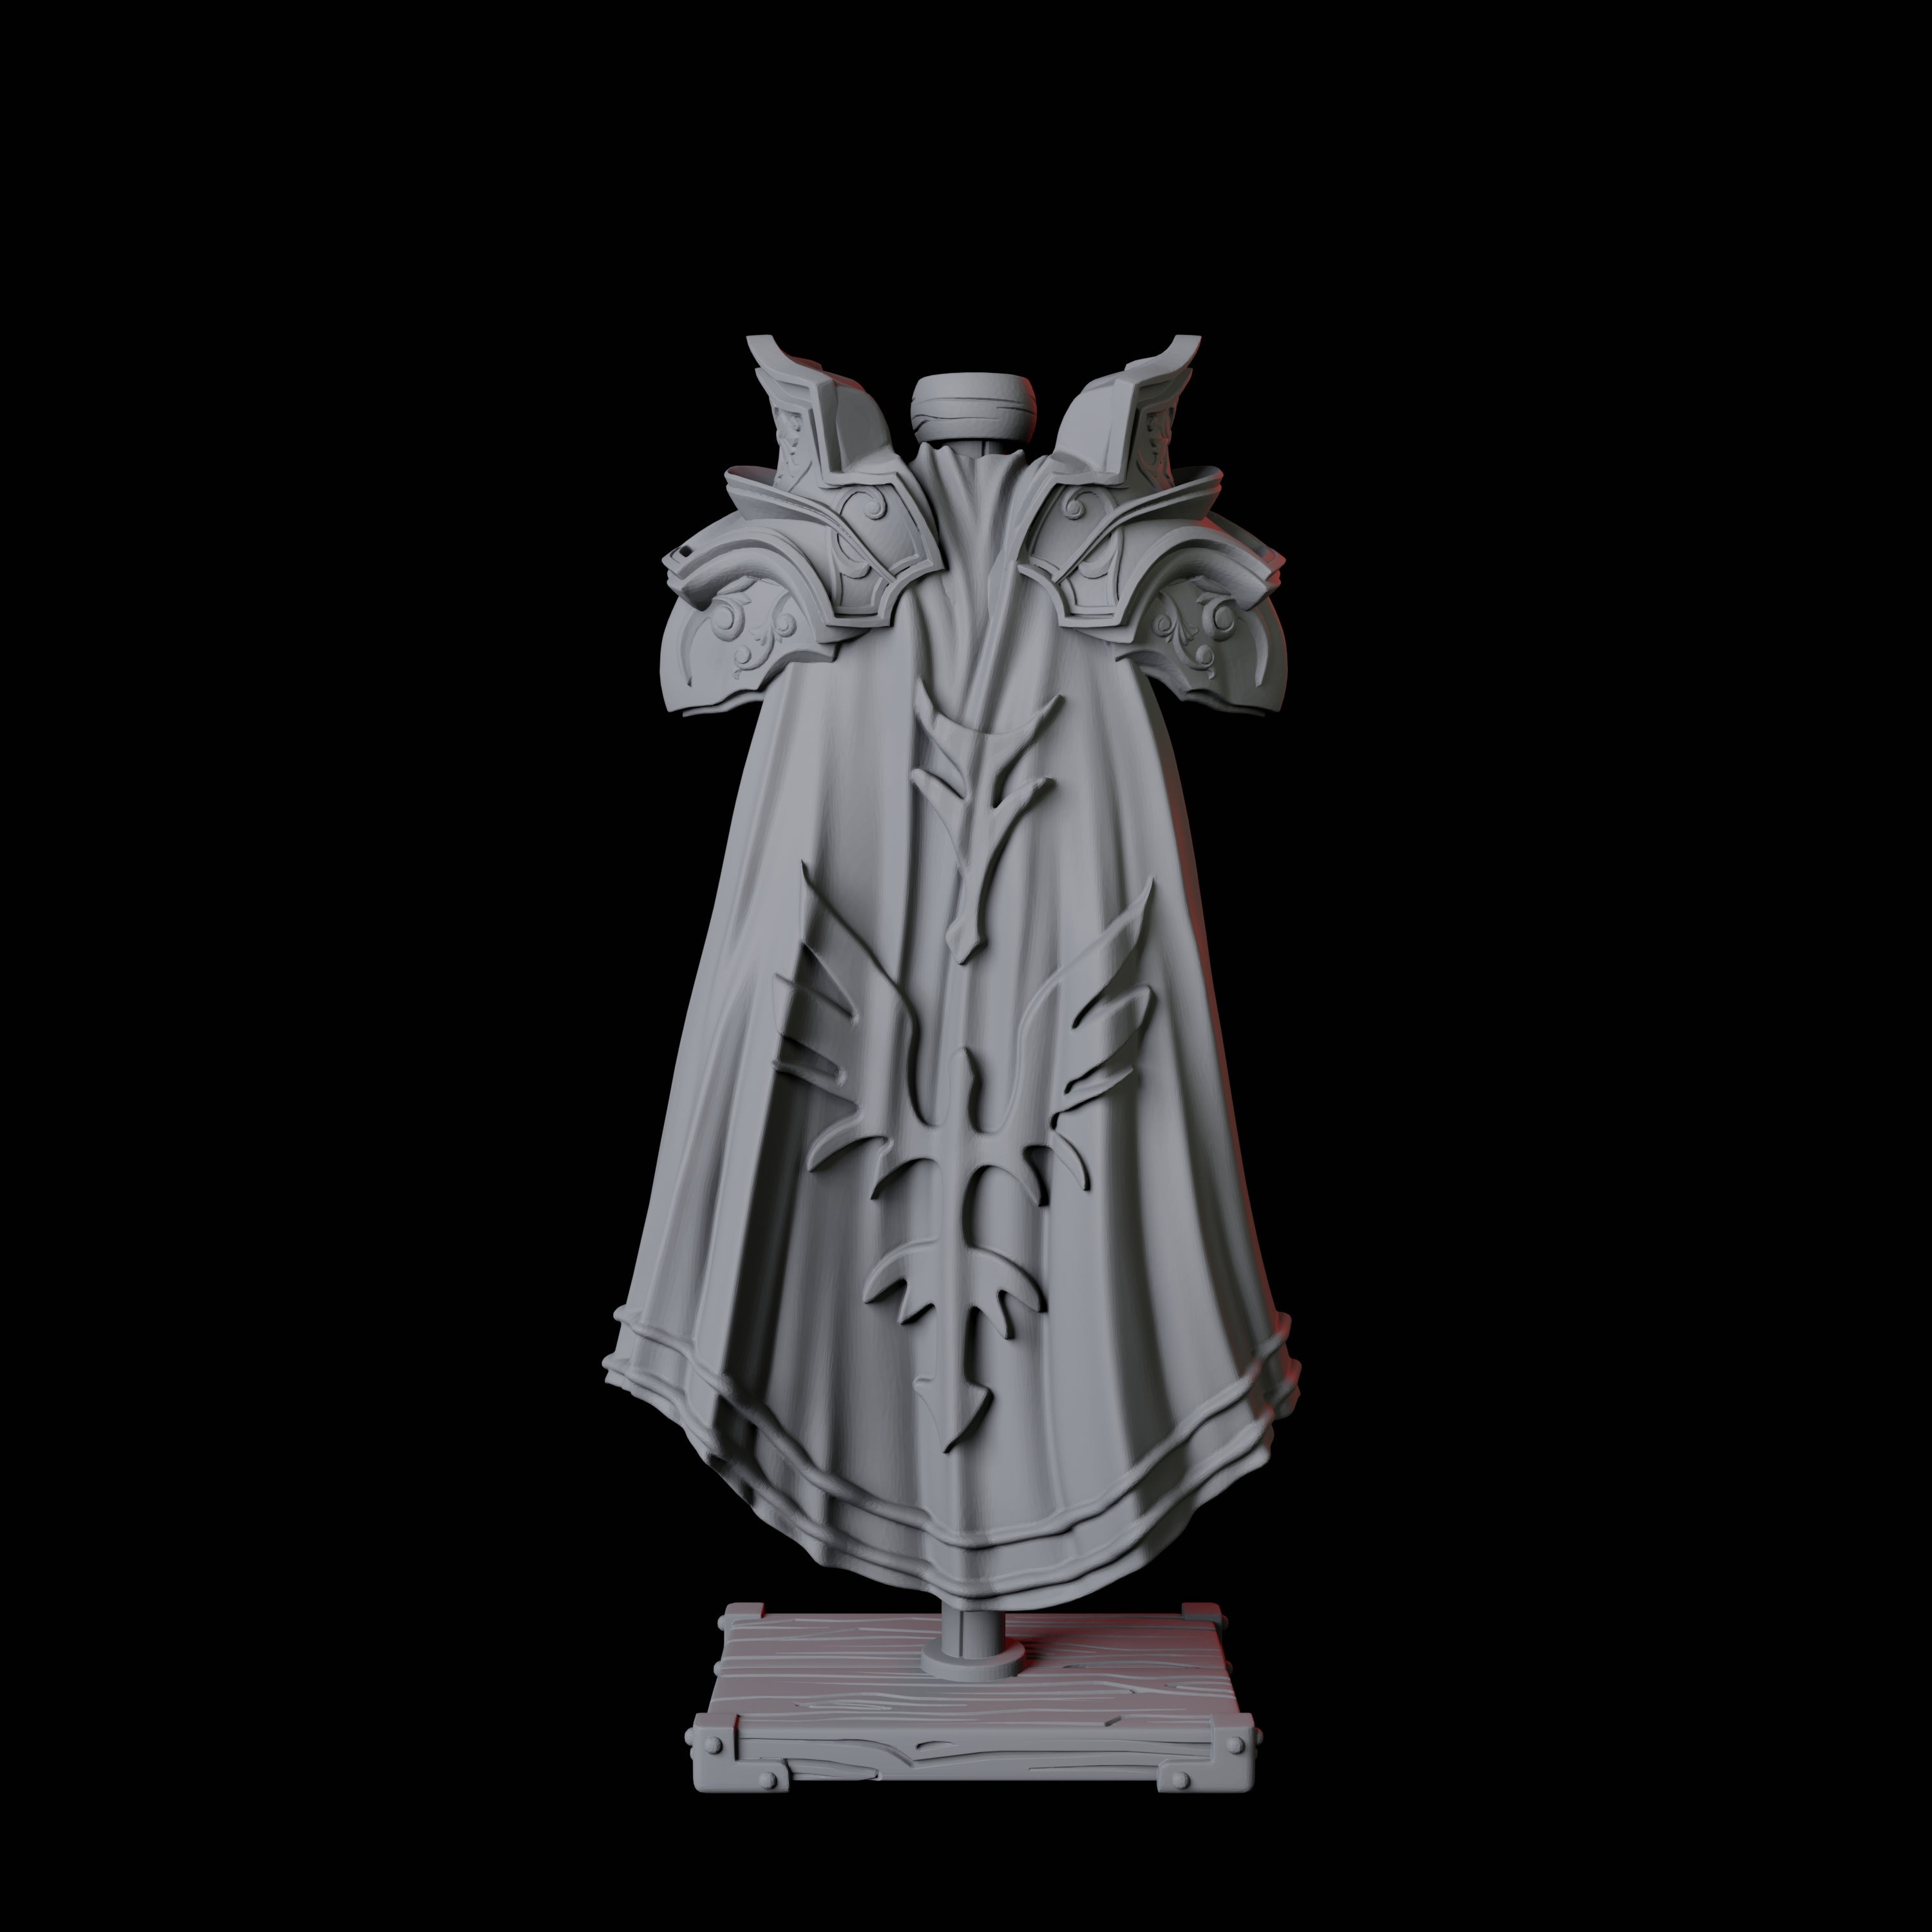 Decorative Armour on a stand Miniature for Dungeons and Dragons, Pathfinder or other TTRPGs